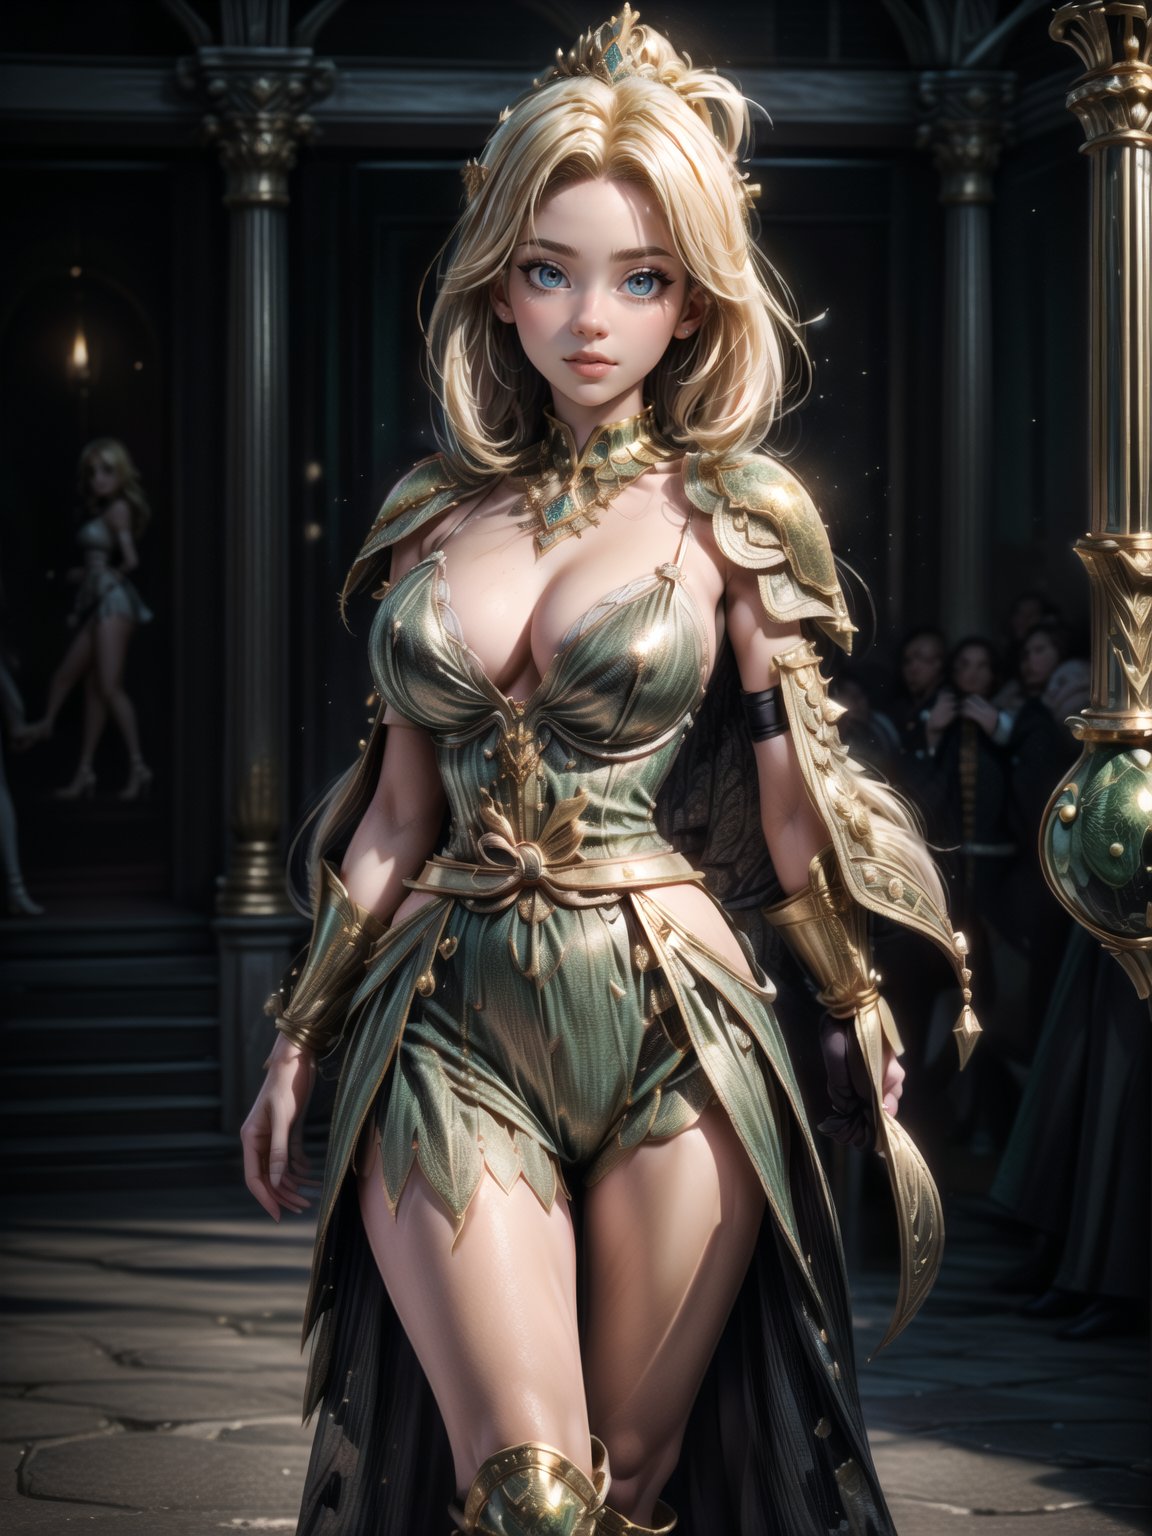 {((1woman))}, {only she is (((black modern medieval armor with small gold parts extremely small and tight on the body, medieval sword on the scabbard fastened at the waist)), only she has ((giant breasts)), (((very short blonde hair, green eyes, vampire fangs)), ((staring at the viewer, smiling, expression of desire)), (((fighting pose))}, {((in city of King Arthur's time,  with multiple people, product sales fair))}, ((whole body):1.5), 16k, best quality, best resolution, best sharpness,